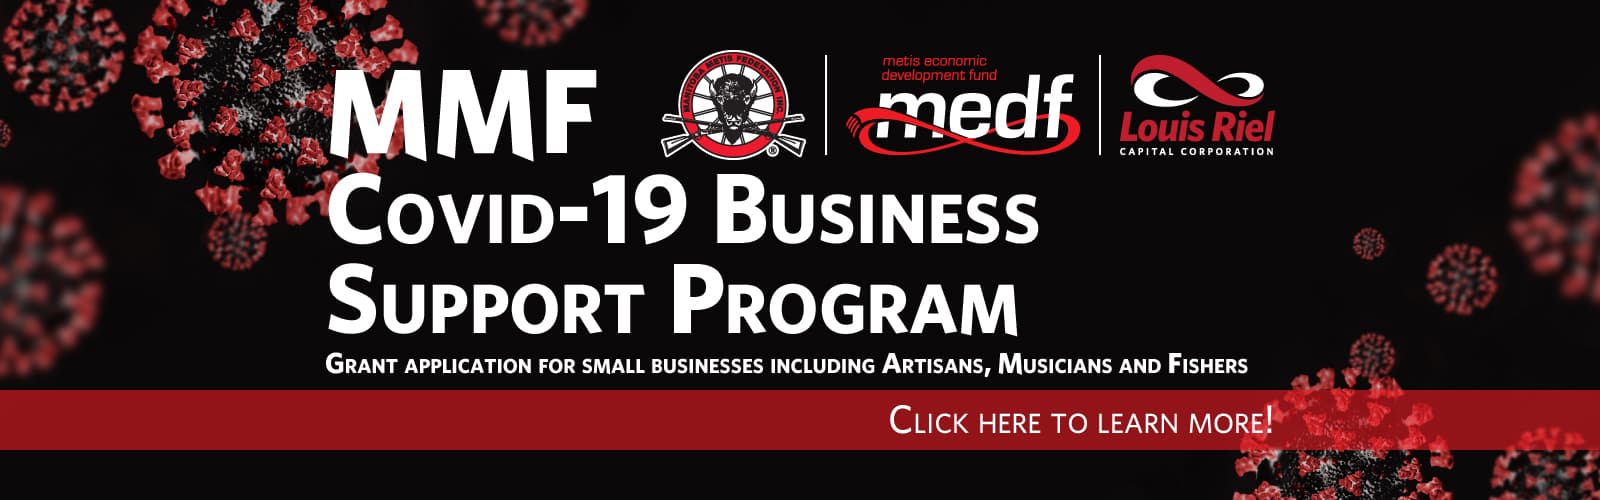 MMF Covid-19 Business Support Program